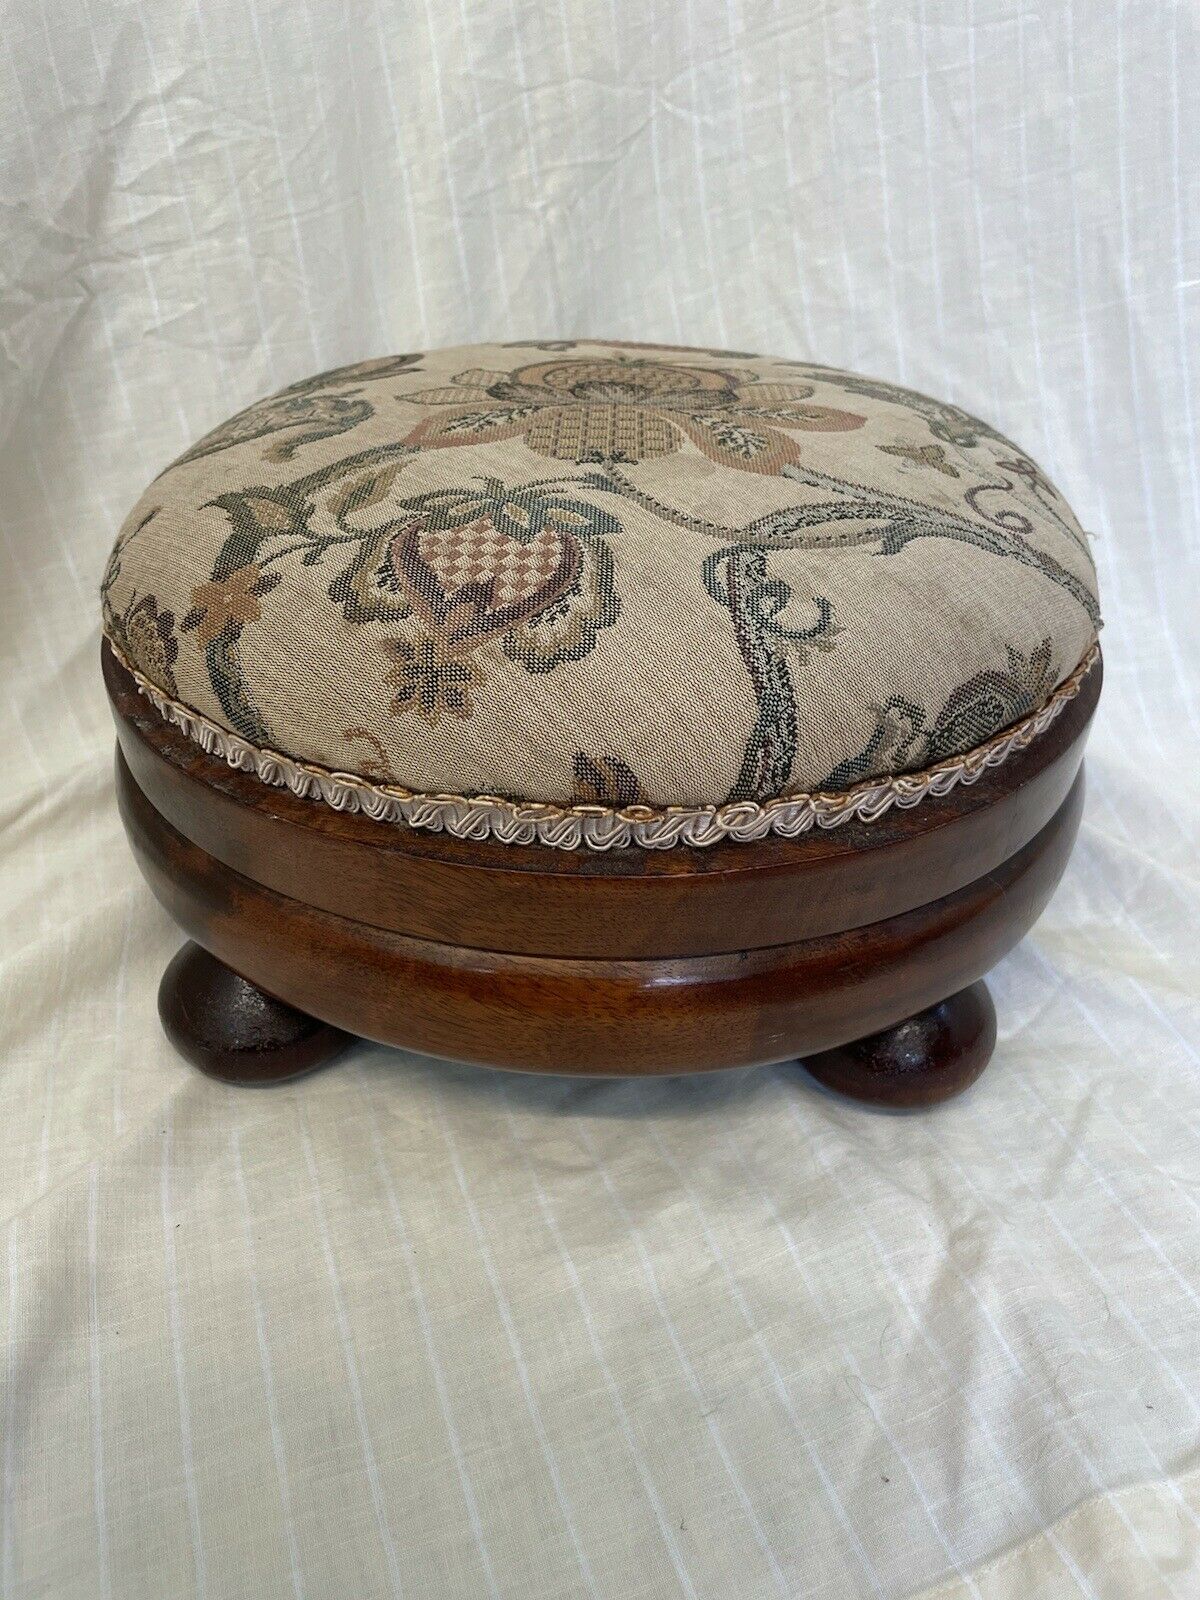 Antique Valuations: Vintage Antique Needle Stitch foot Stool Embroidery Rest Stool Tapestry.